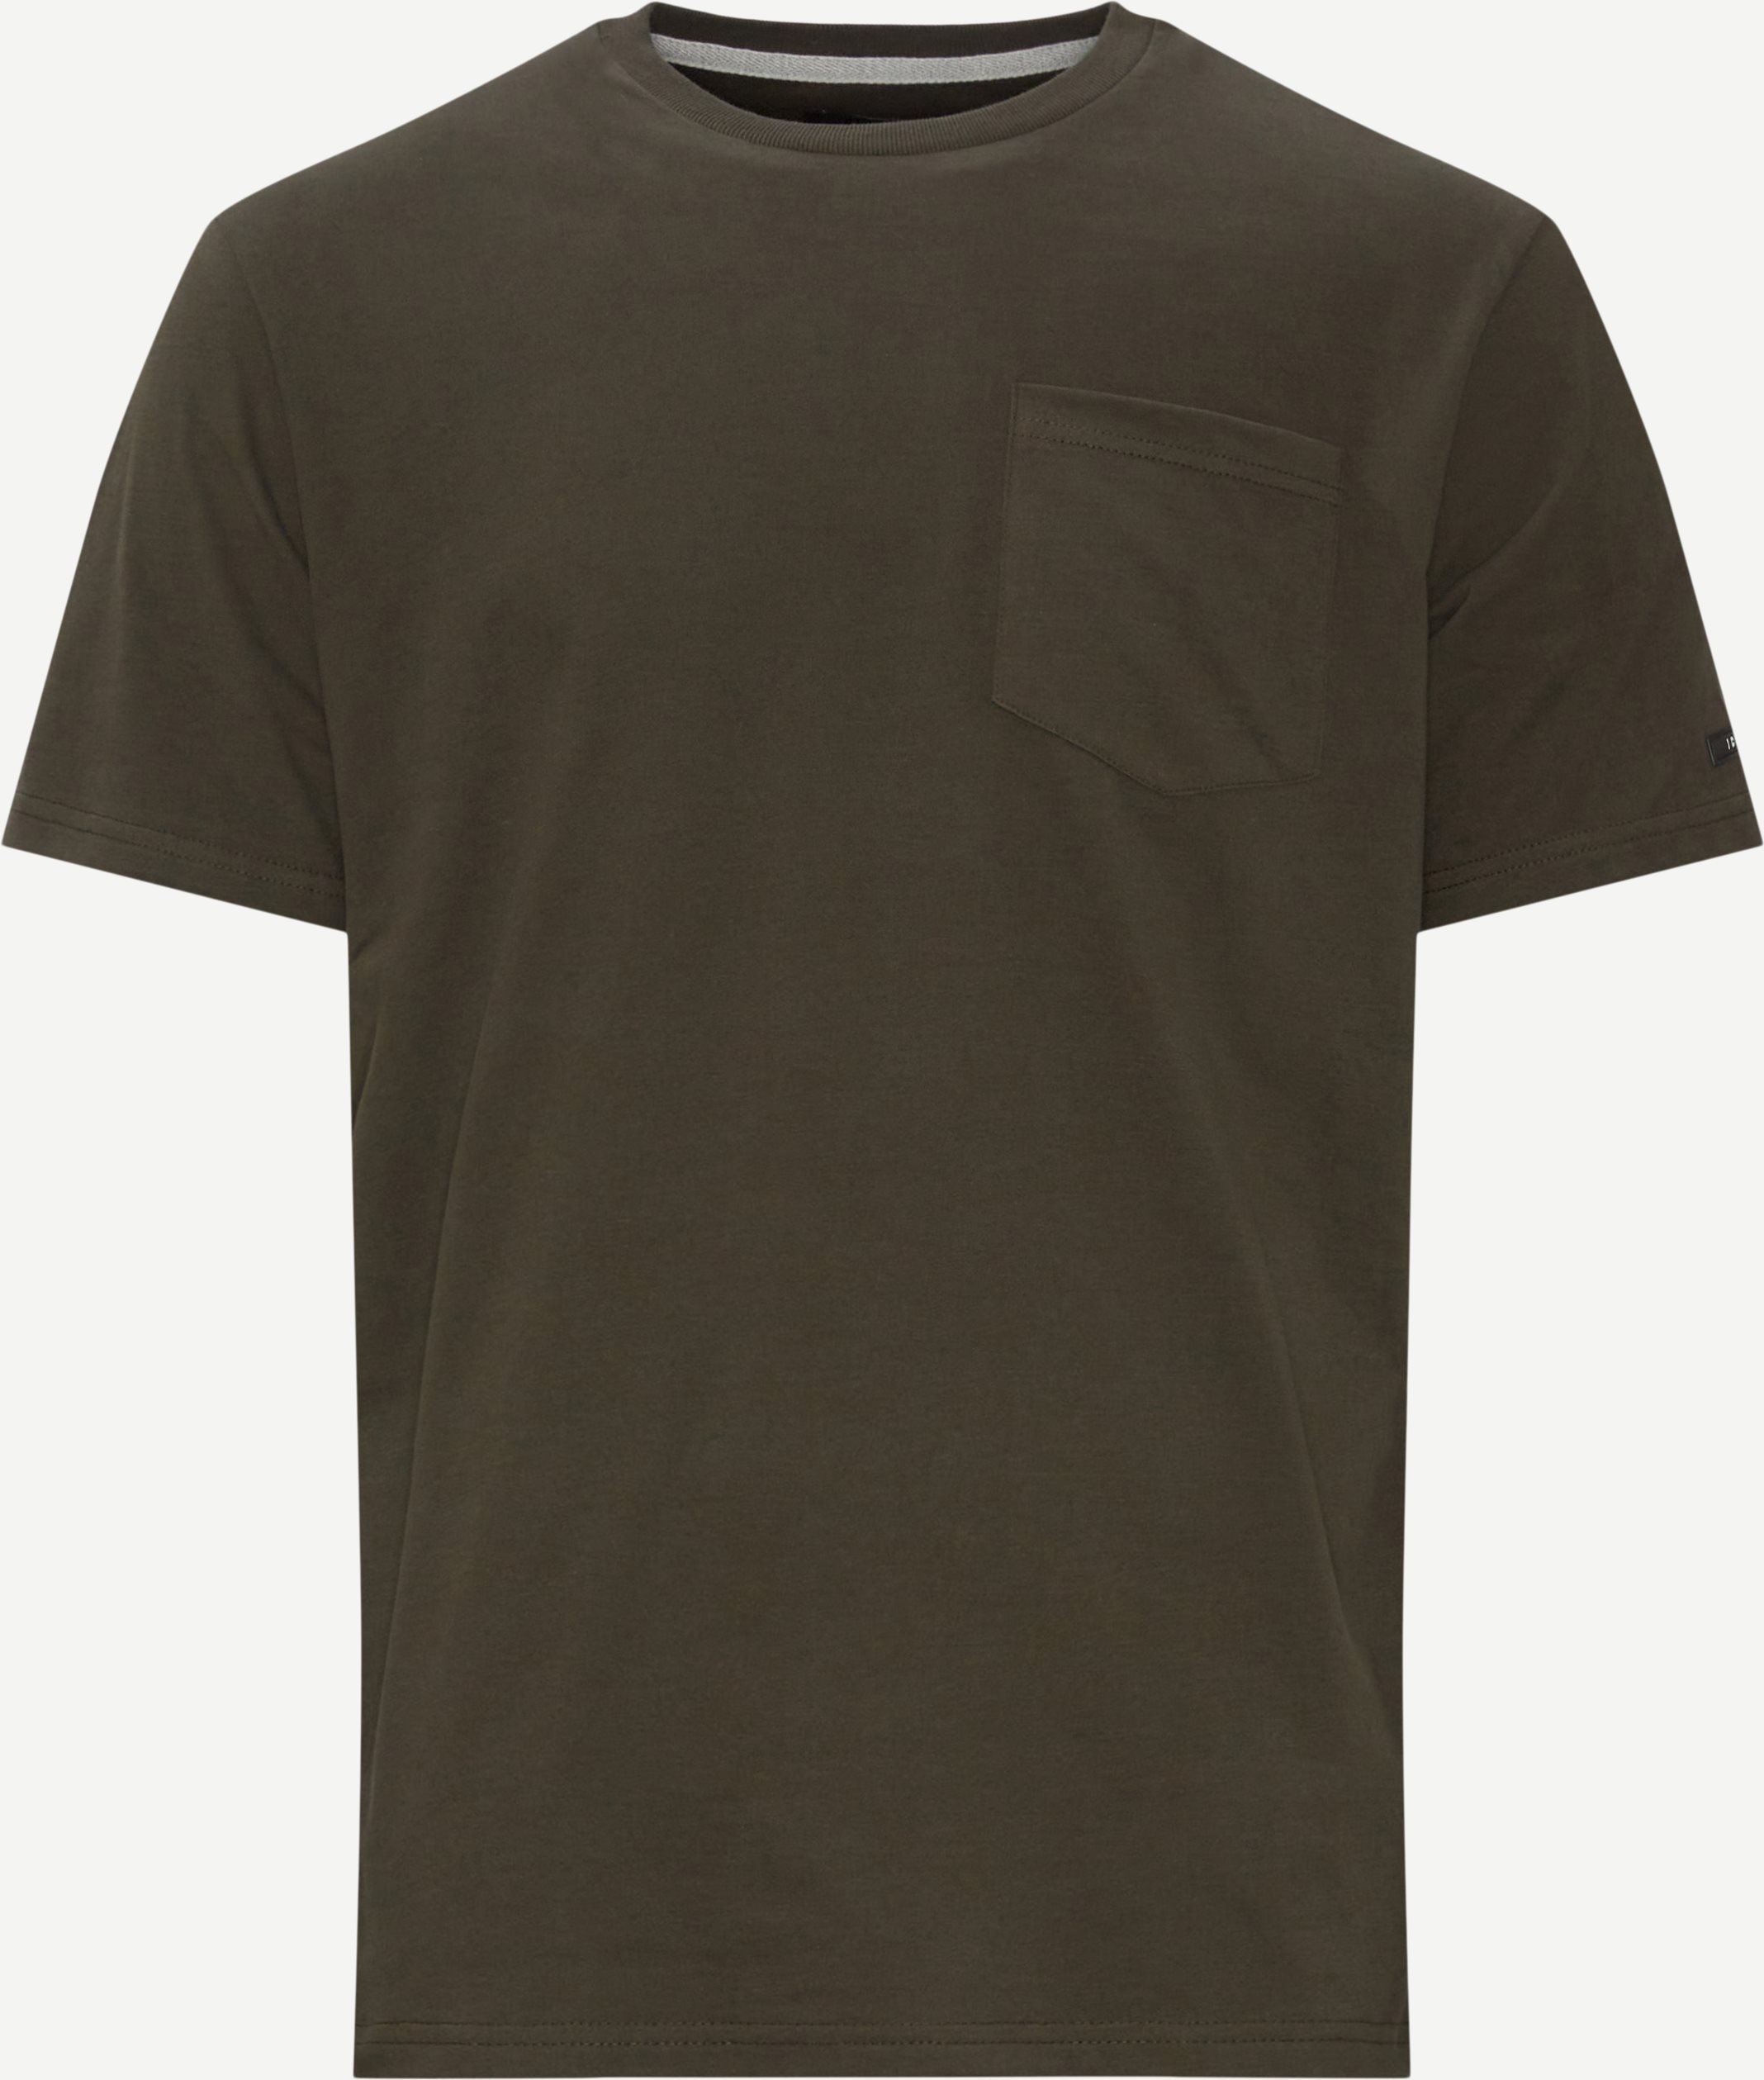 T-shirts - Regular fit - Army